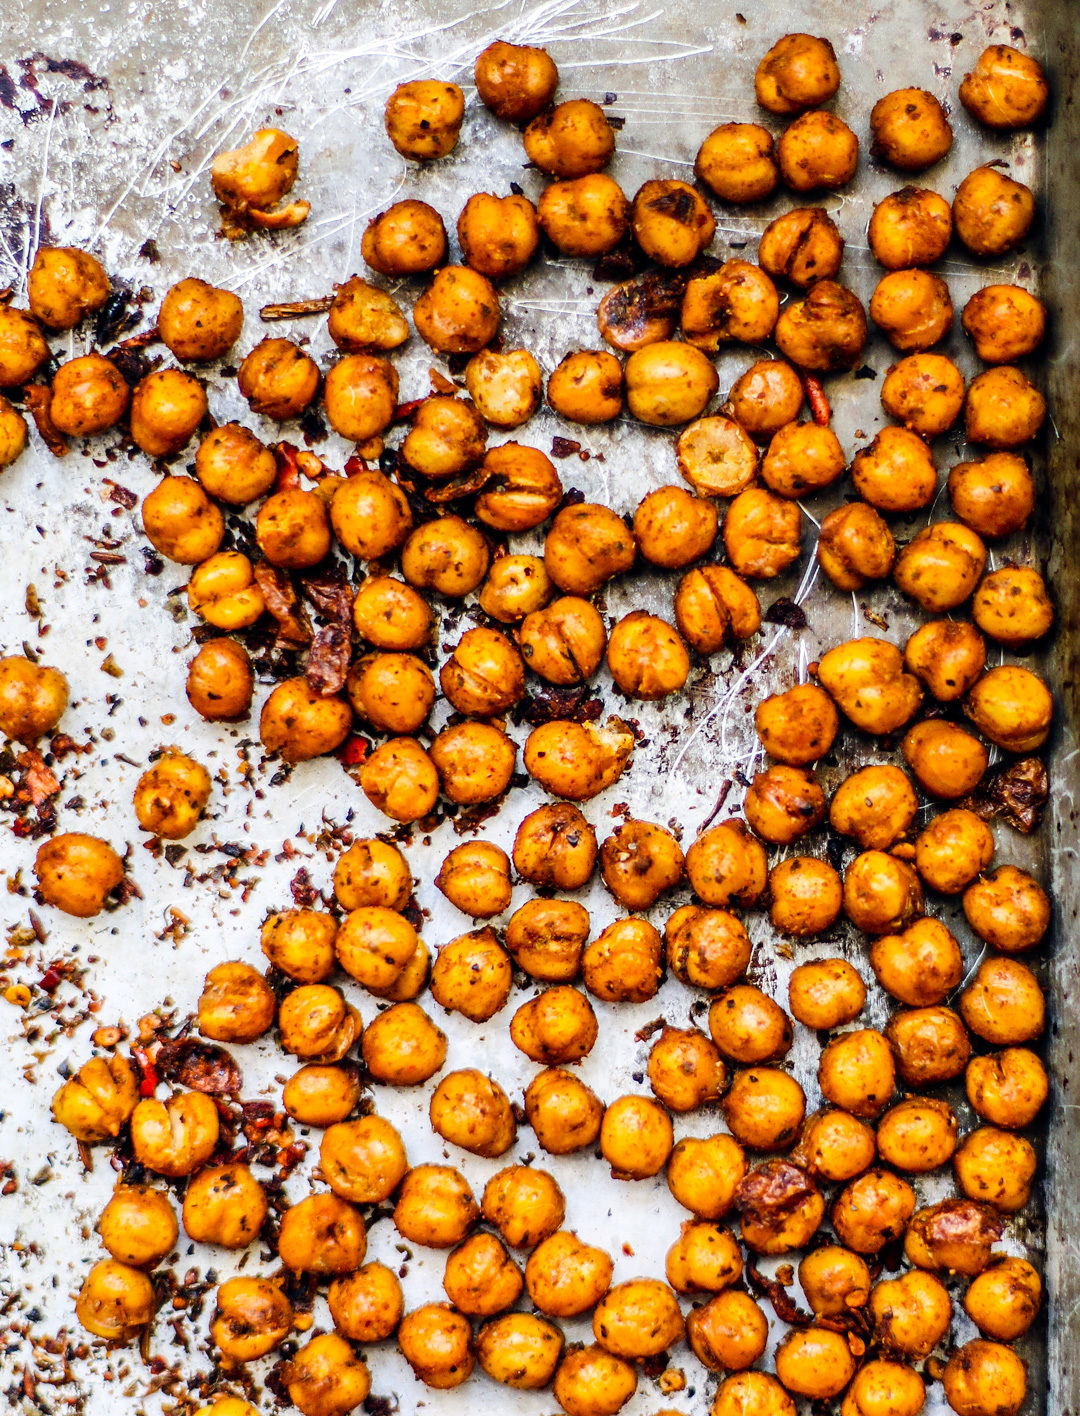 Baking tray full of crispy chipotle chickpeas.